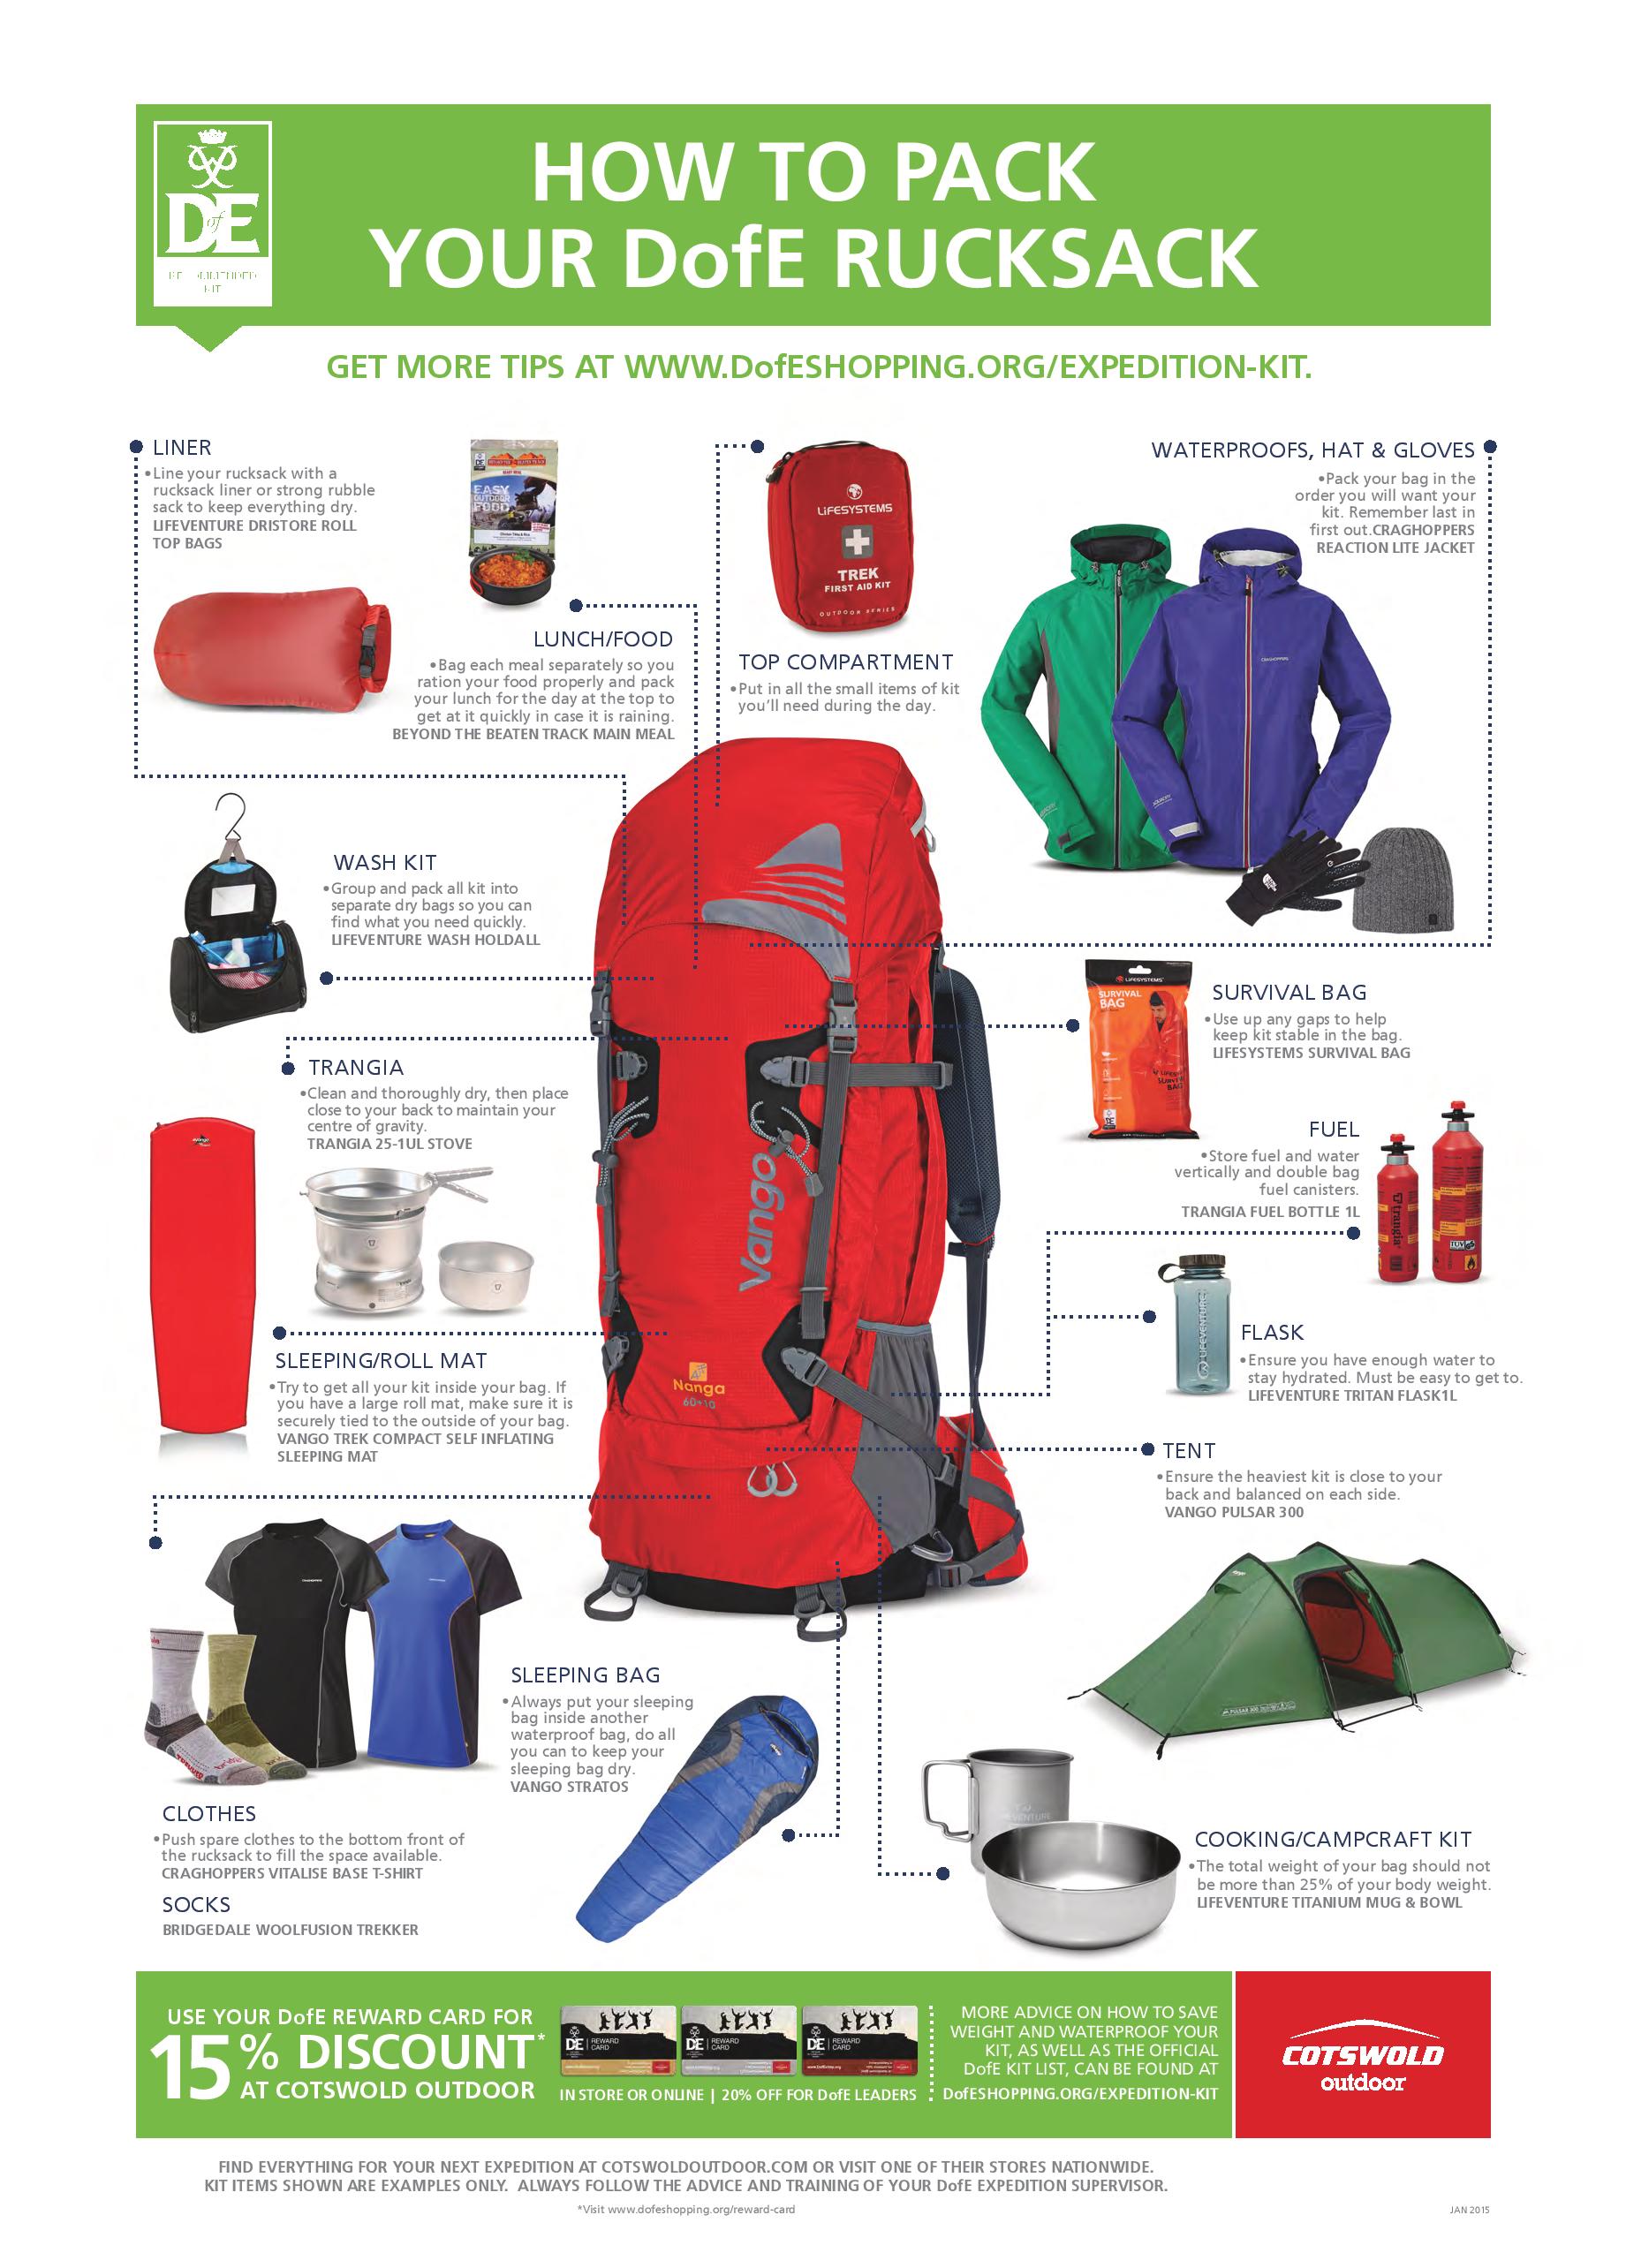 How To Pack A Backpack The Right Way - How%20to%20pack%20your%20backpack%20right